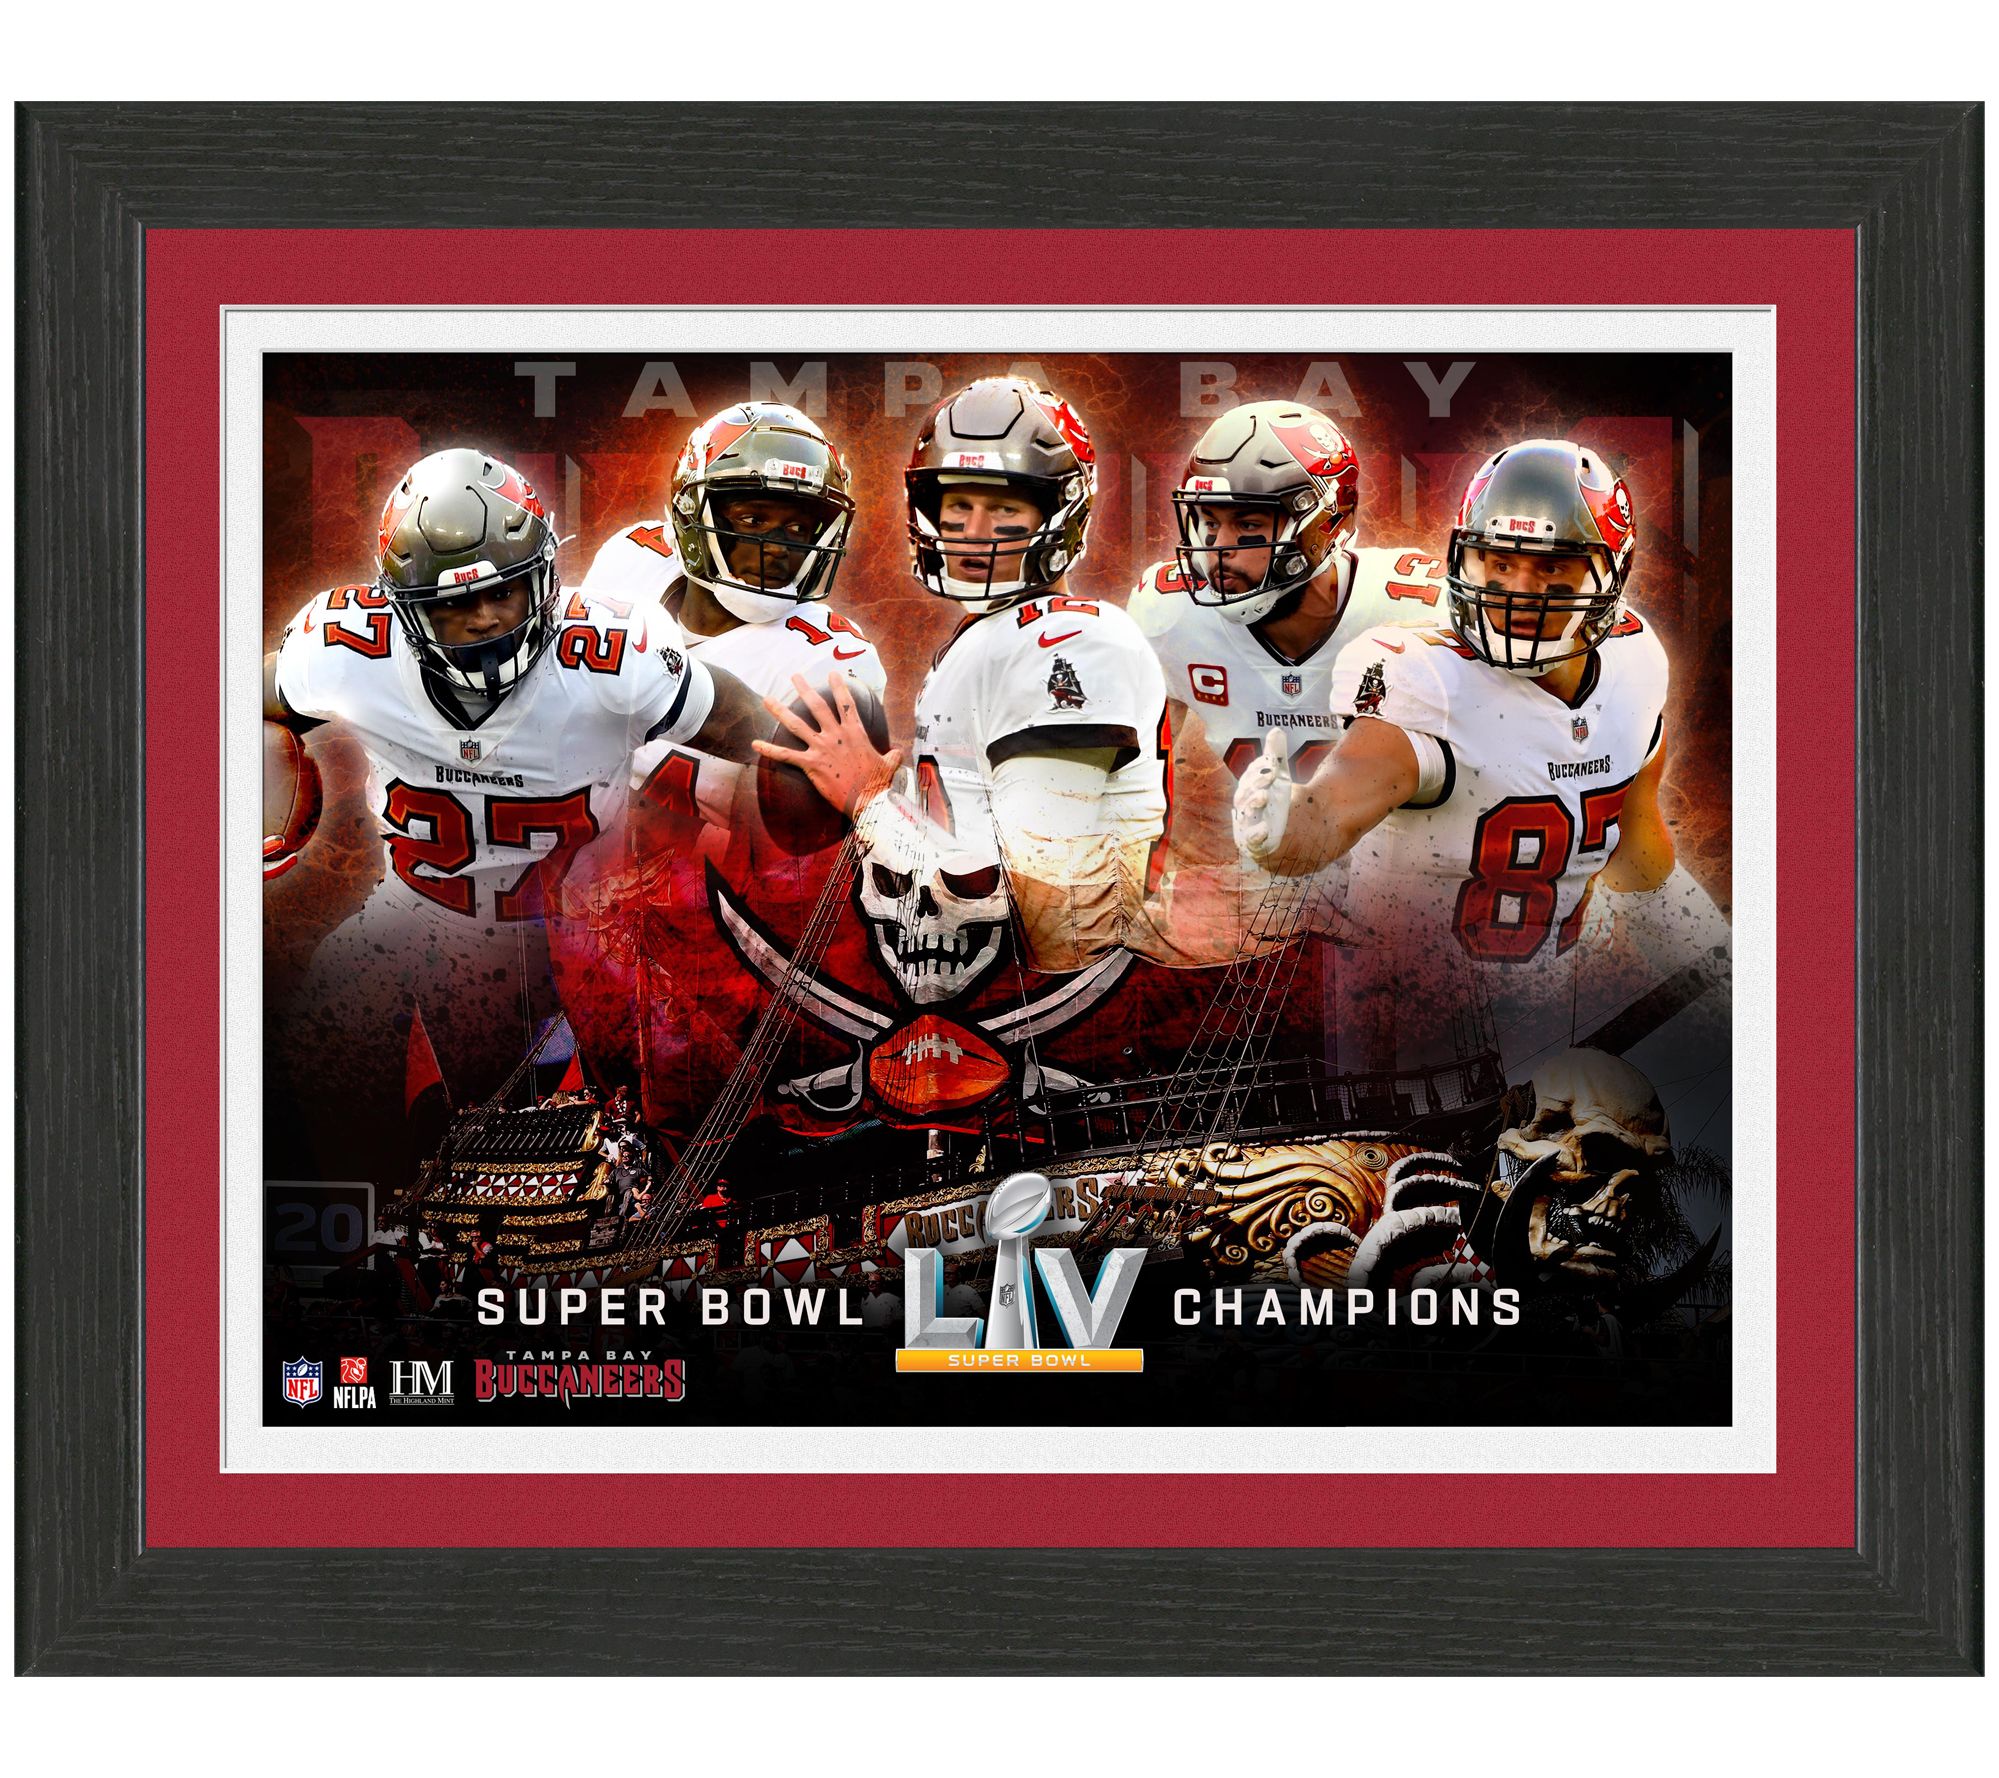 Tampa Bay Buccaneers Framed 20 x 24 Super Bowl LV Champions